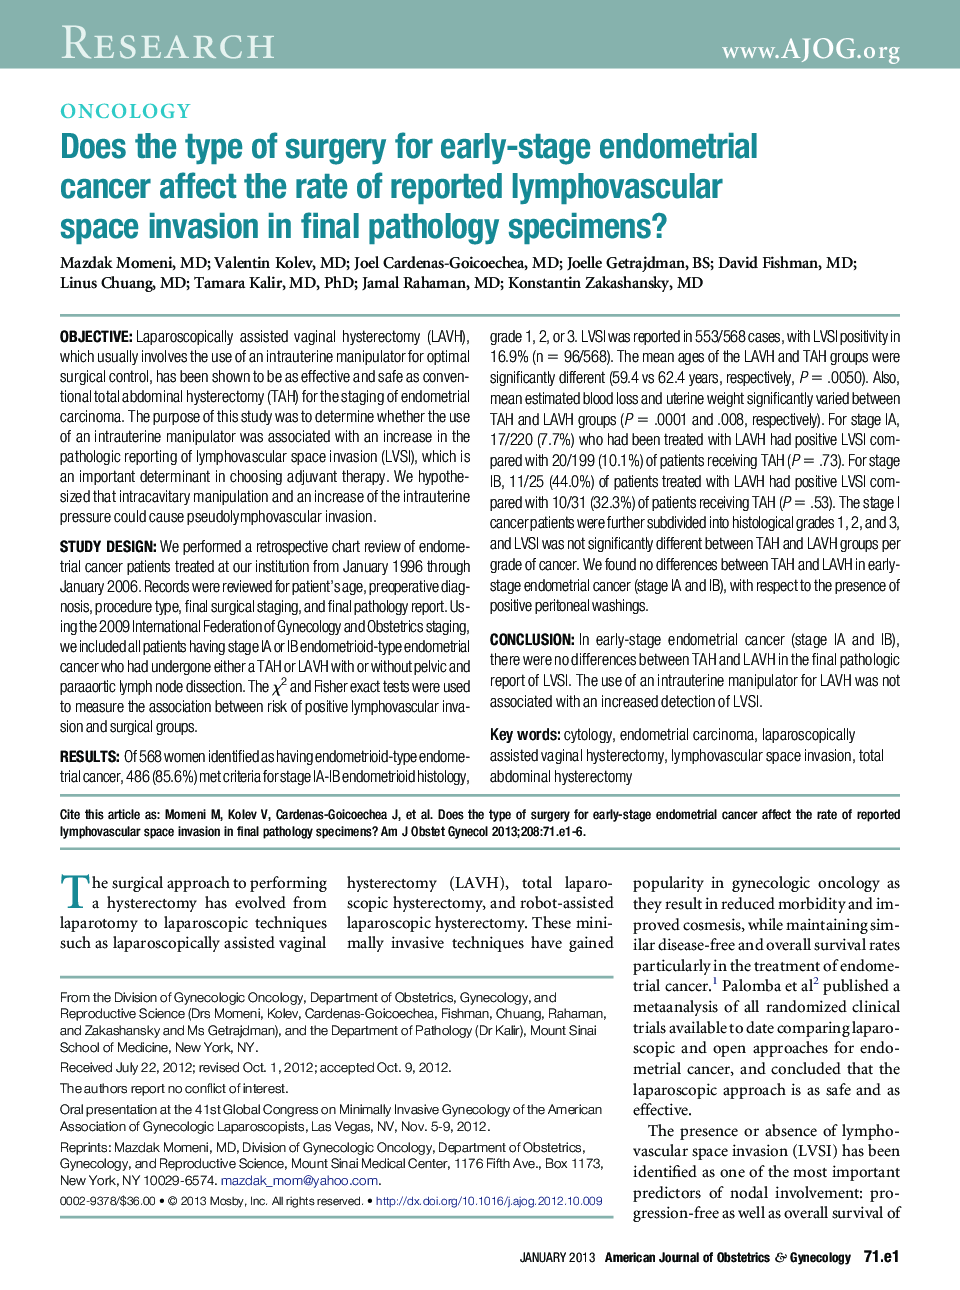 Does the type of surgery for early-stage endometrial cancer affect the rate of reported lymphovascular space invasion in final pathology specimens?